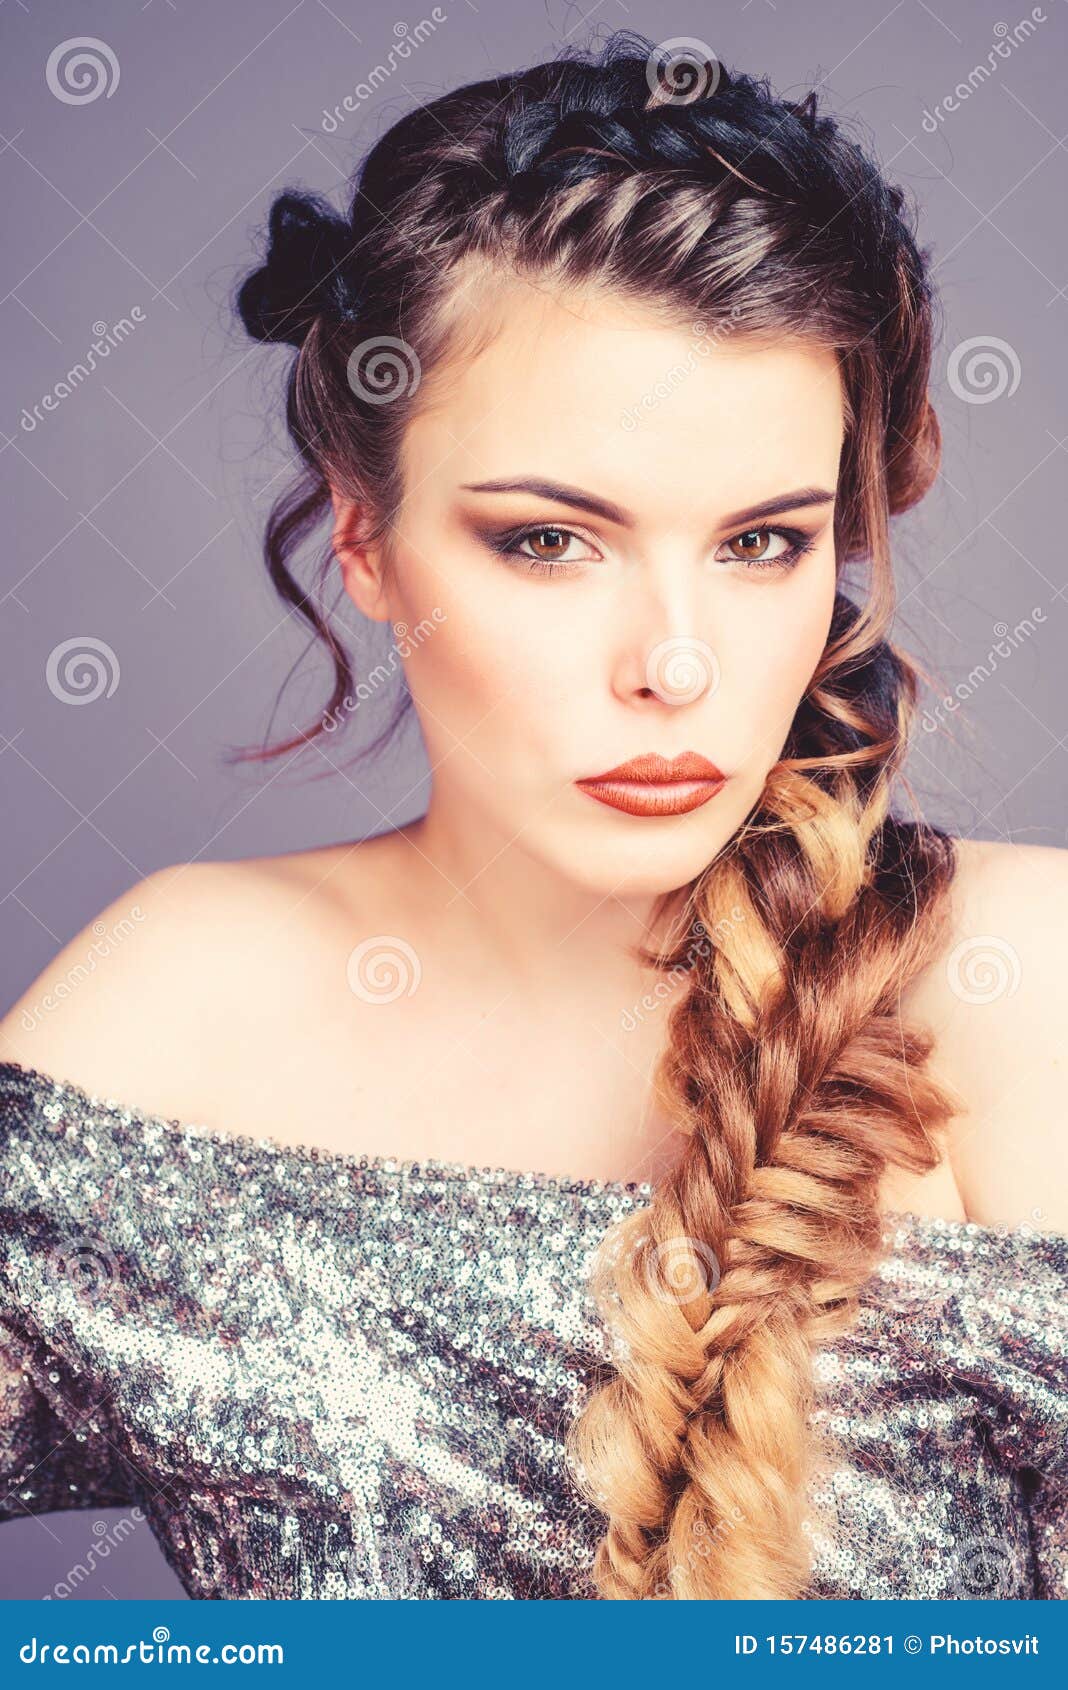 Braided Hairstyle. Beautiful Young Woman with Modern Hairstyle. Girl Makeup  Face Braided Long Hair Stock Image - Image of hair, creating: 157486281